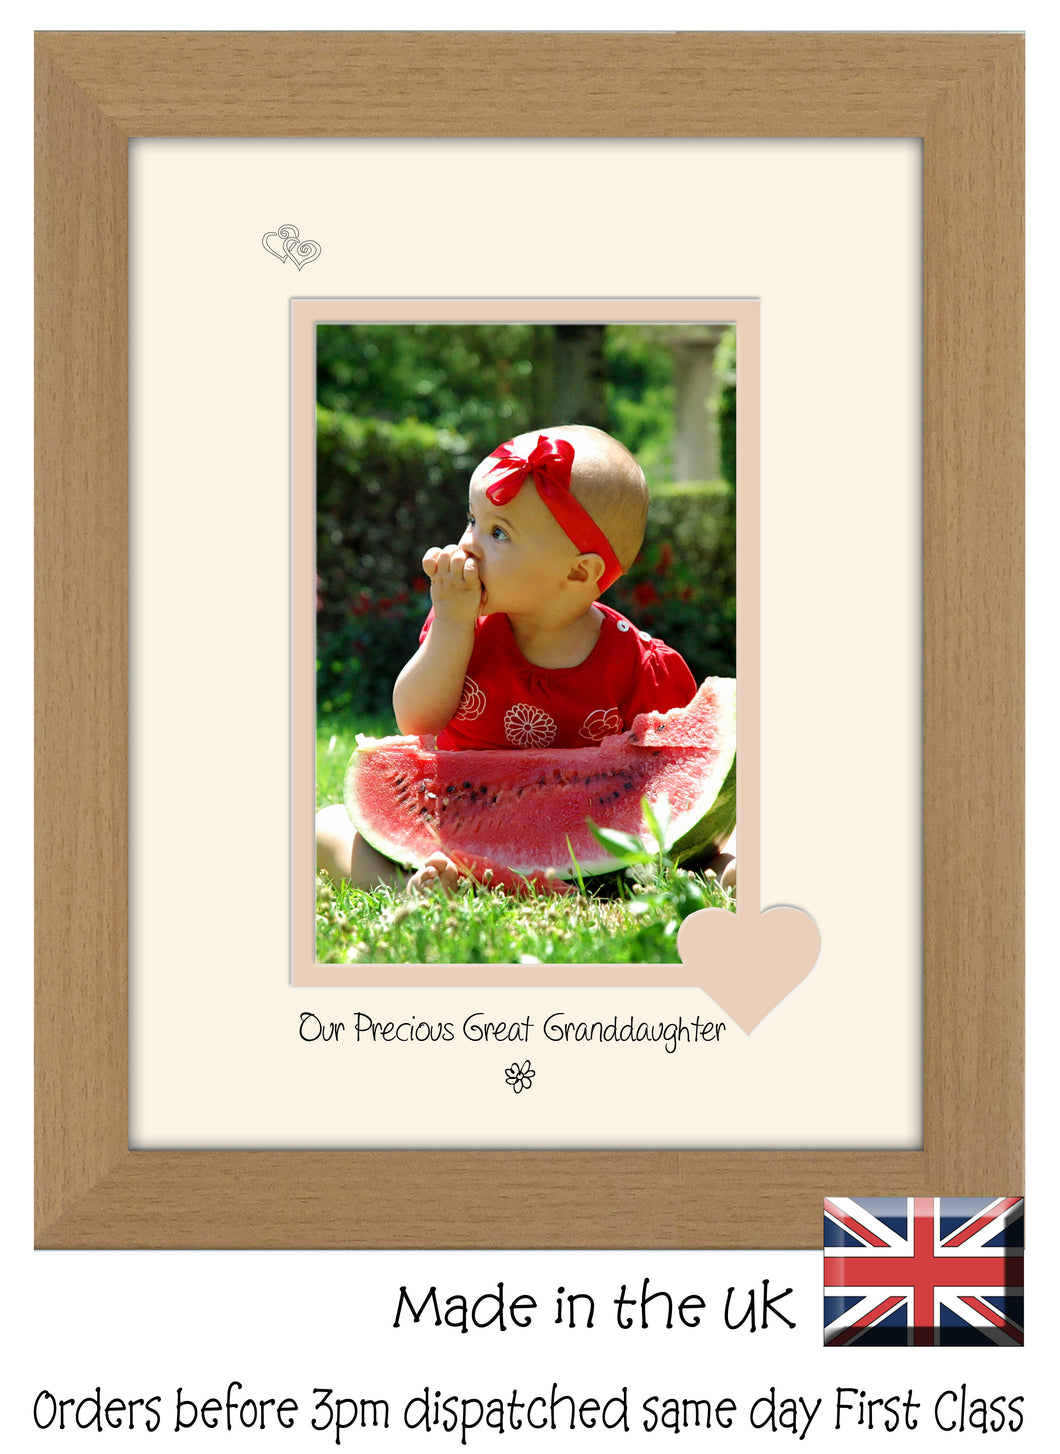 Great Granddaughter Photo Frame - Our precious Great Granddaughter Portrait photo frame 6